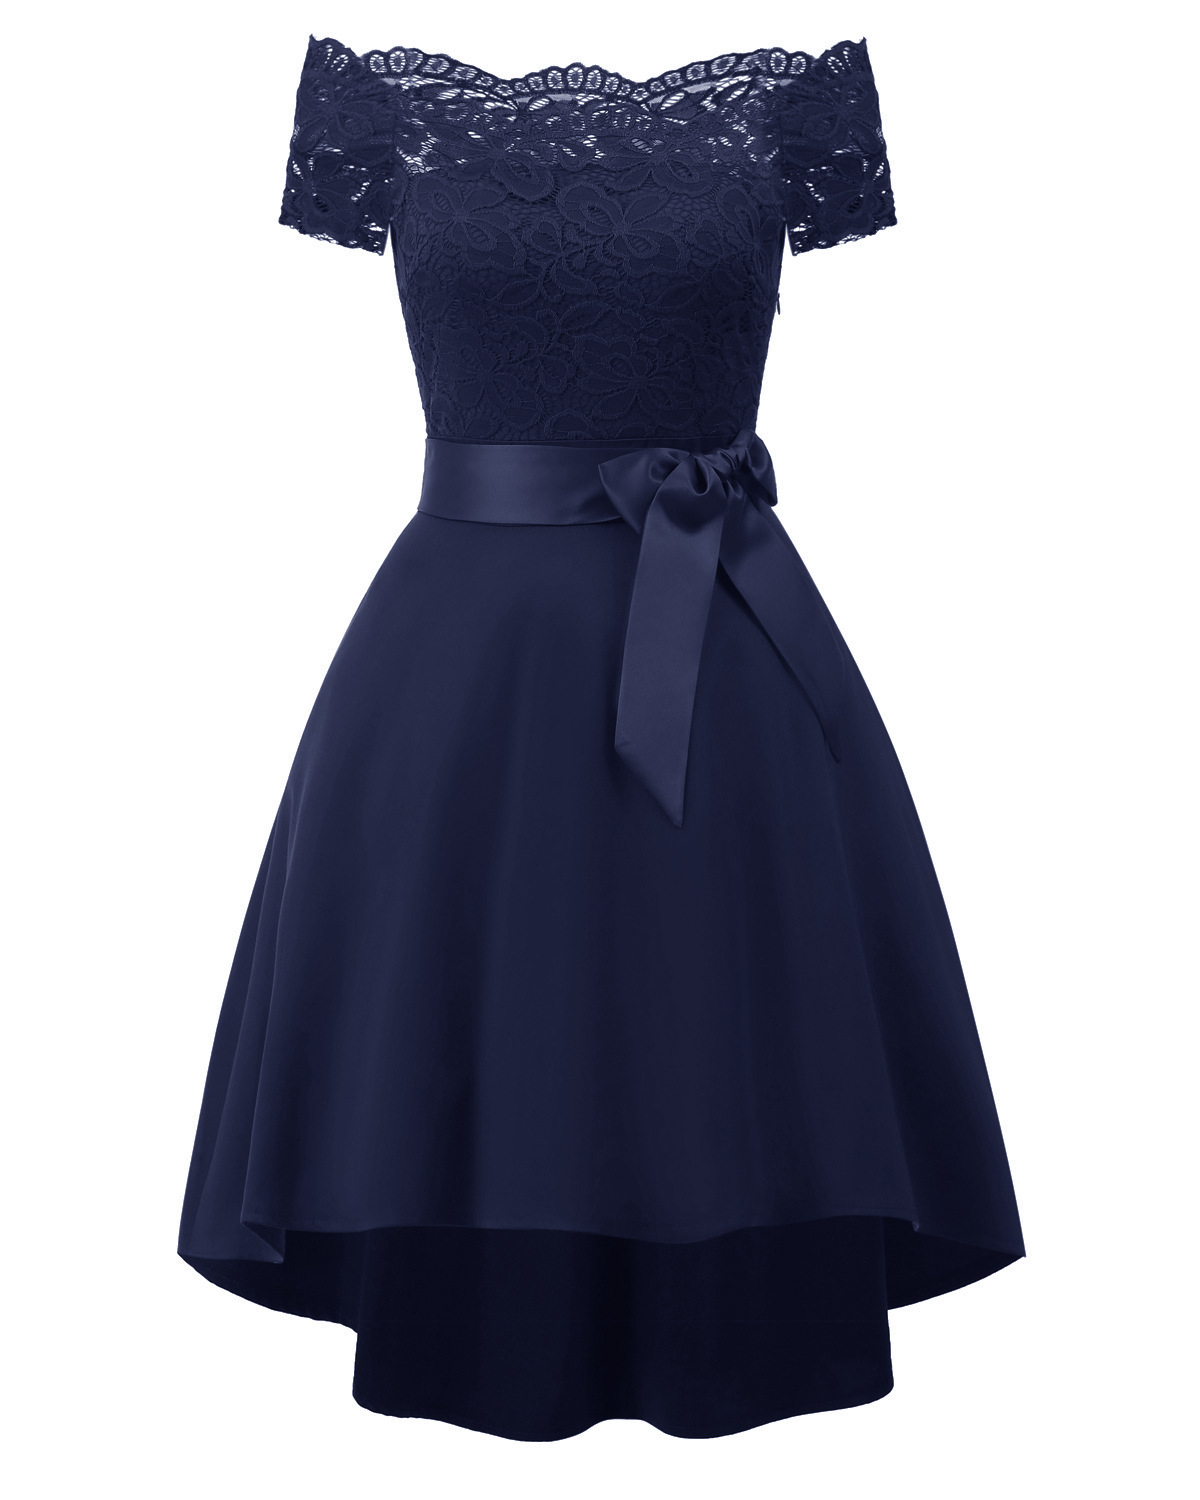 Vintage Floral Lace Dress Summer Women Off The High Low Cocktail Party Dress Navy Blue on Luulla